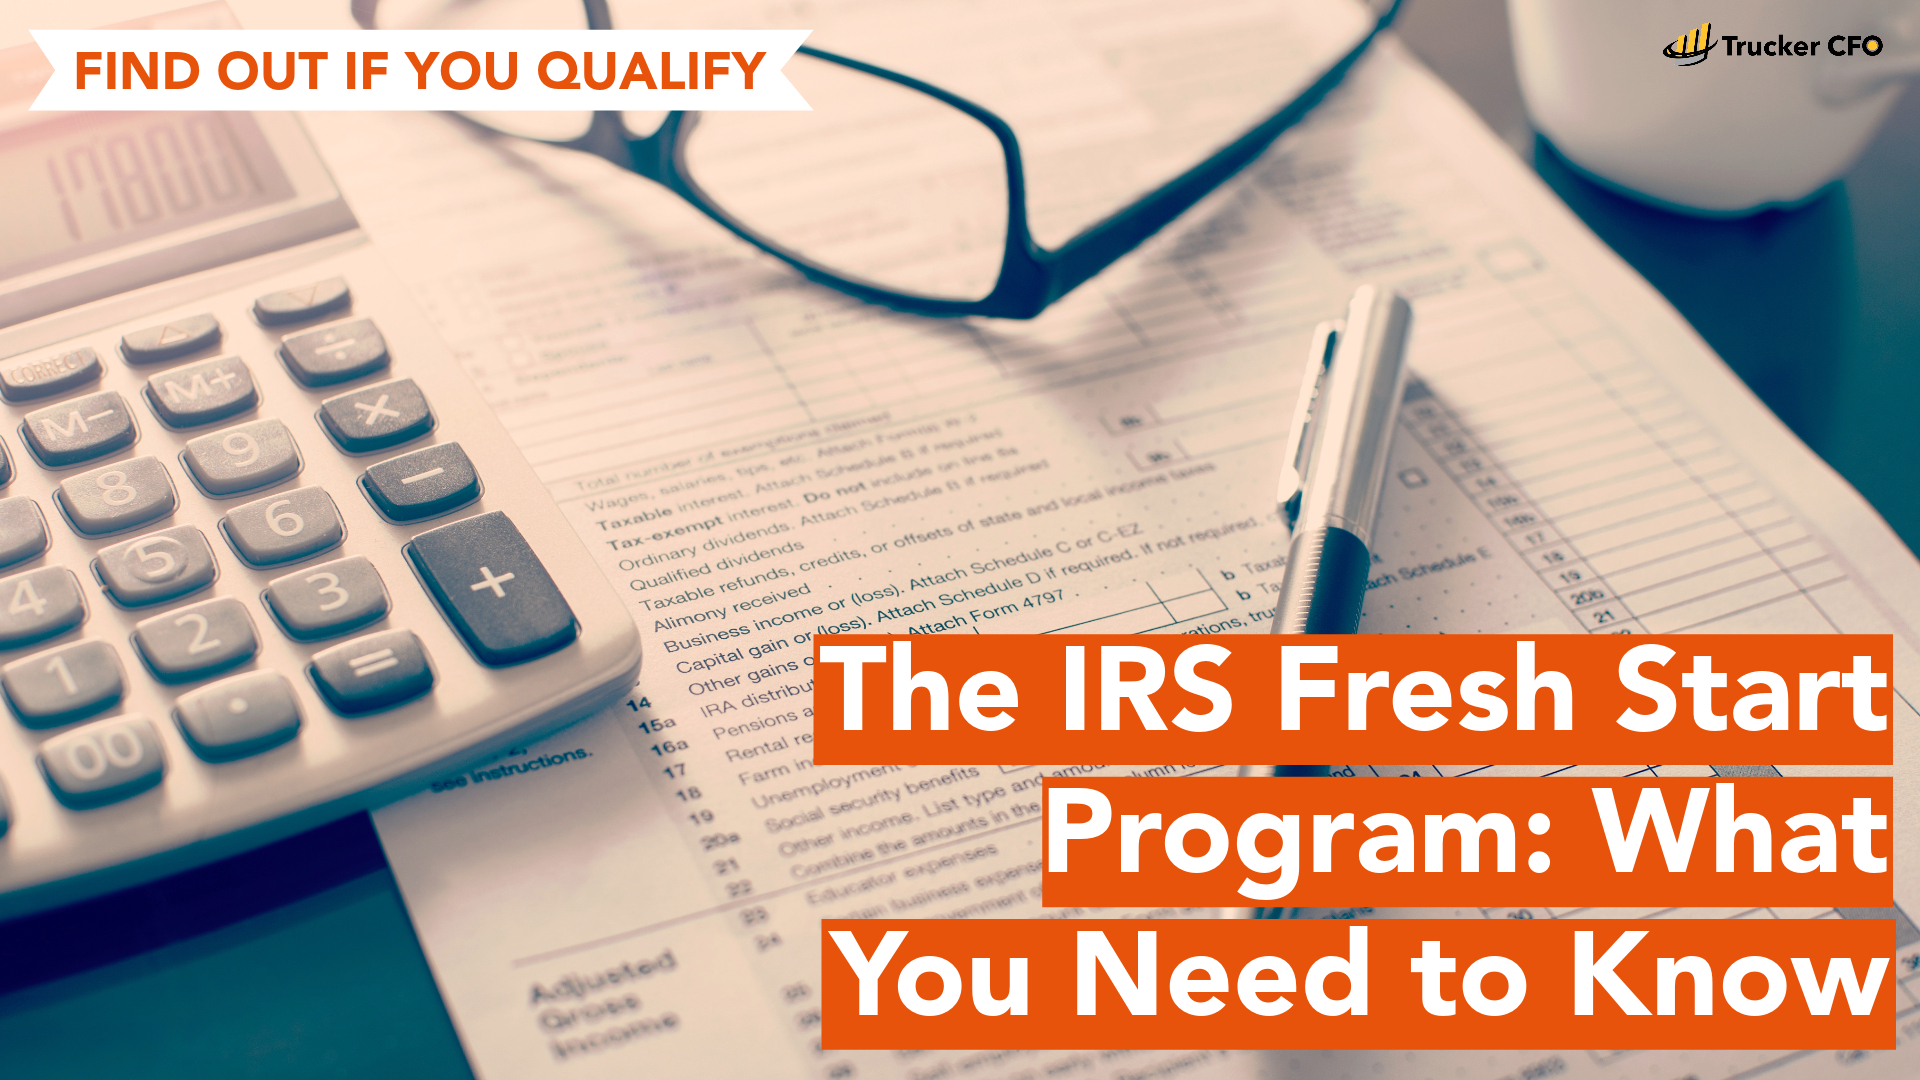 The IRS Fresh Start Program: What You Need to Know